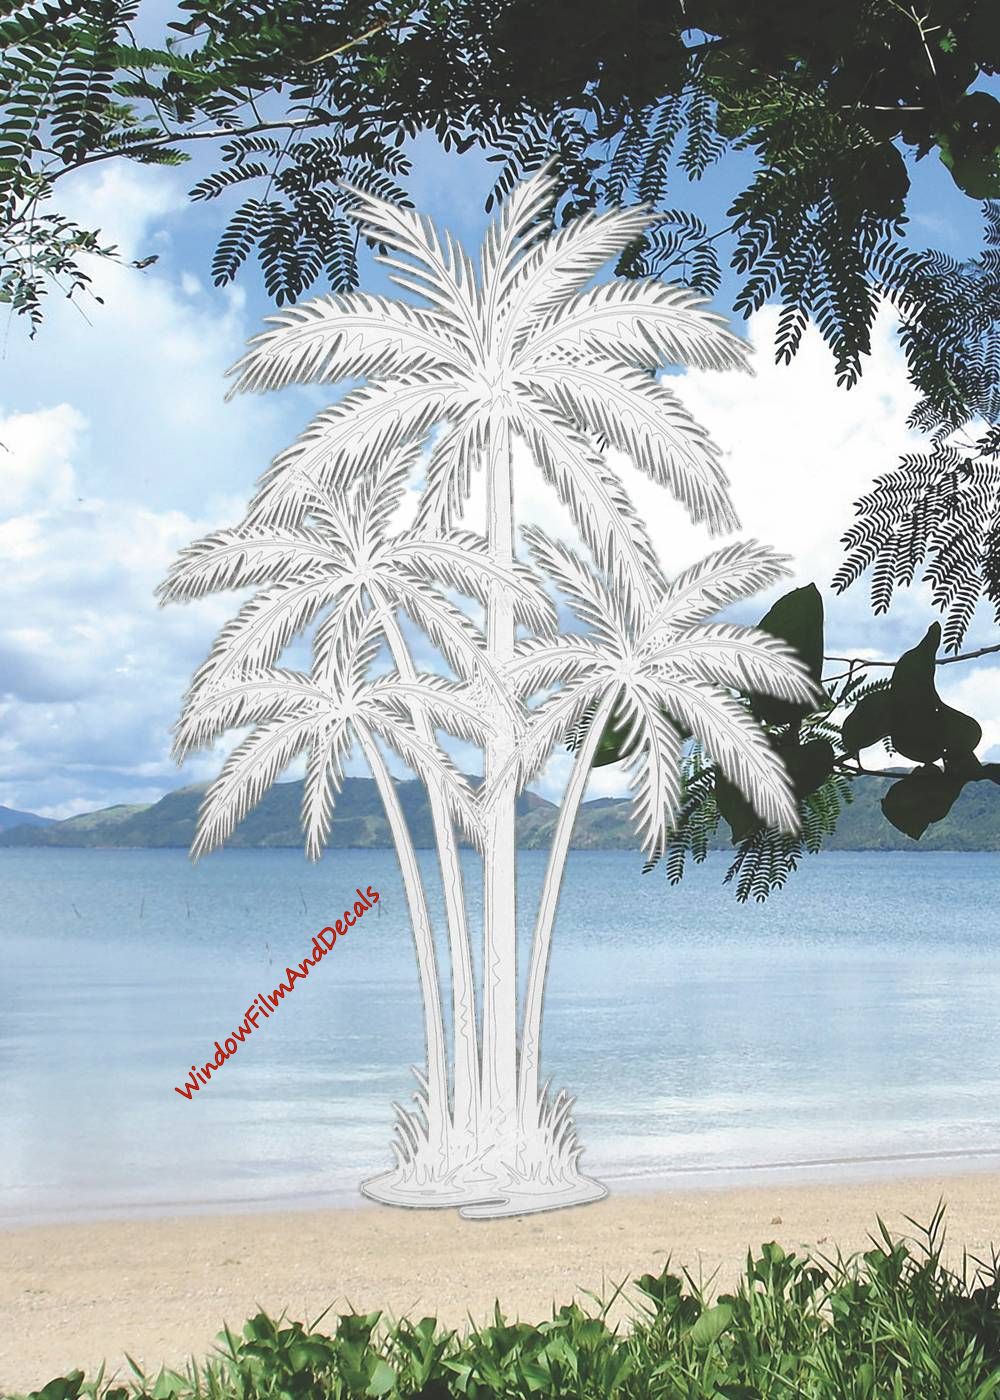 Palm Trees Center Oval Static Cling Window Decal - Clear w/White Palm Design